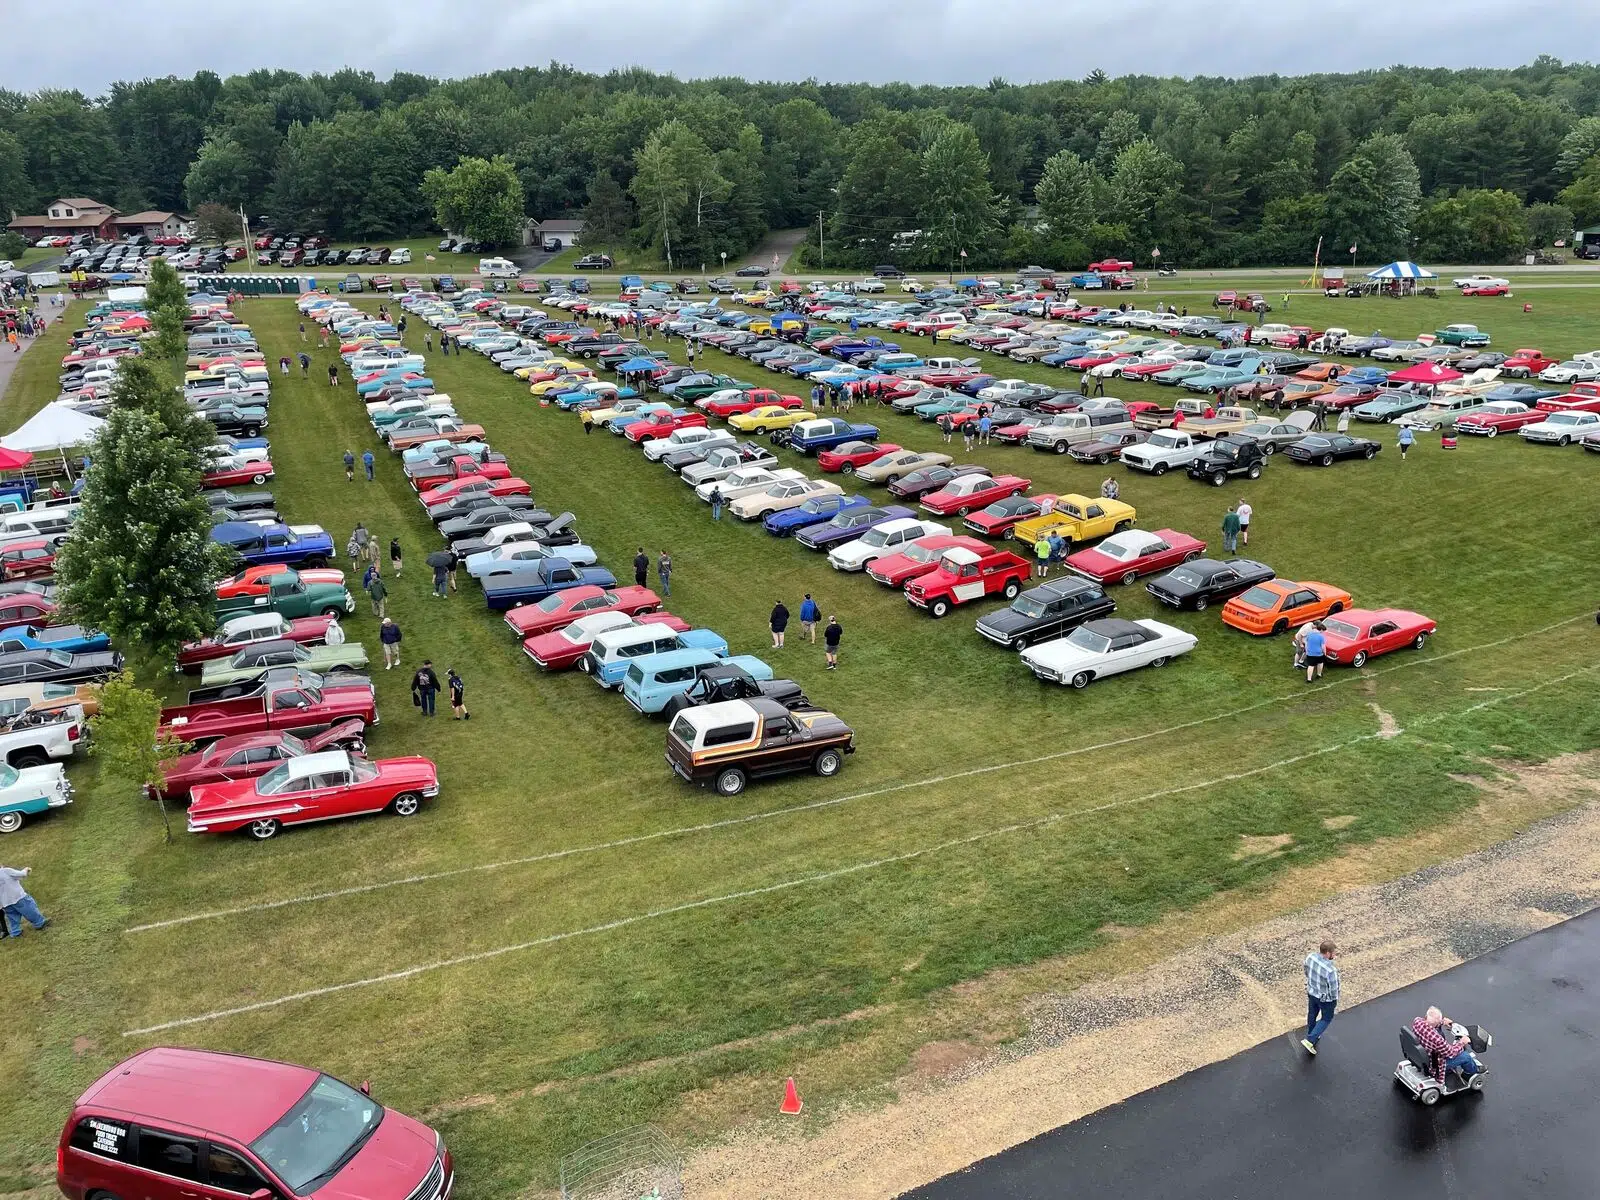 50th Anniversary Iola Car Show Underway 101 WIXX Your Hit Music Station